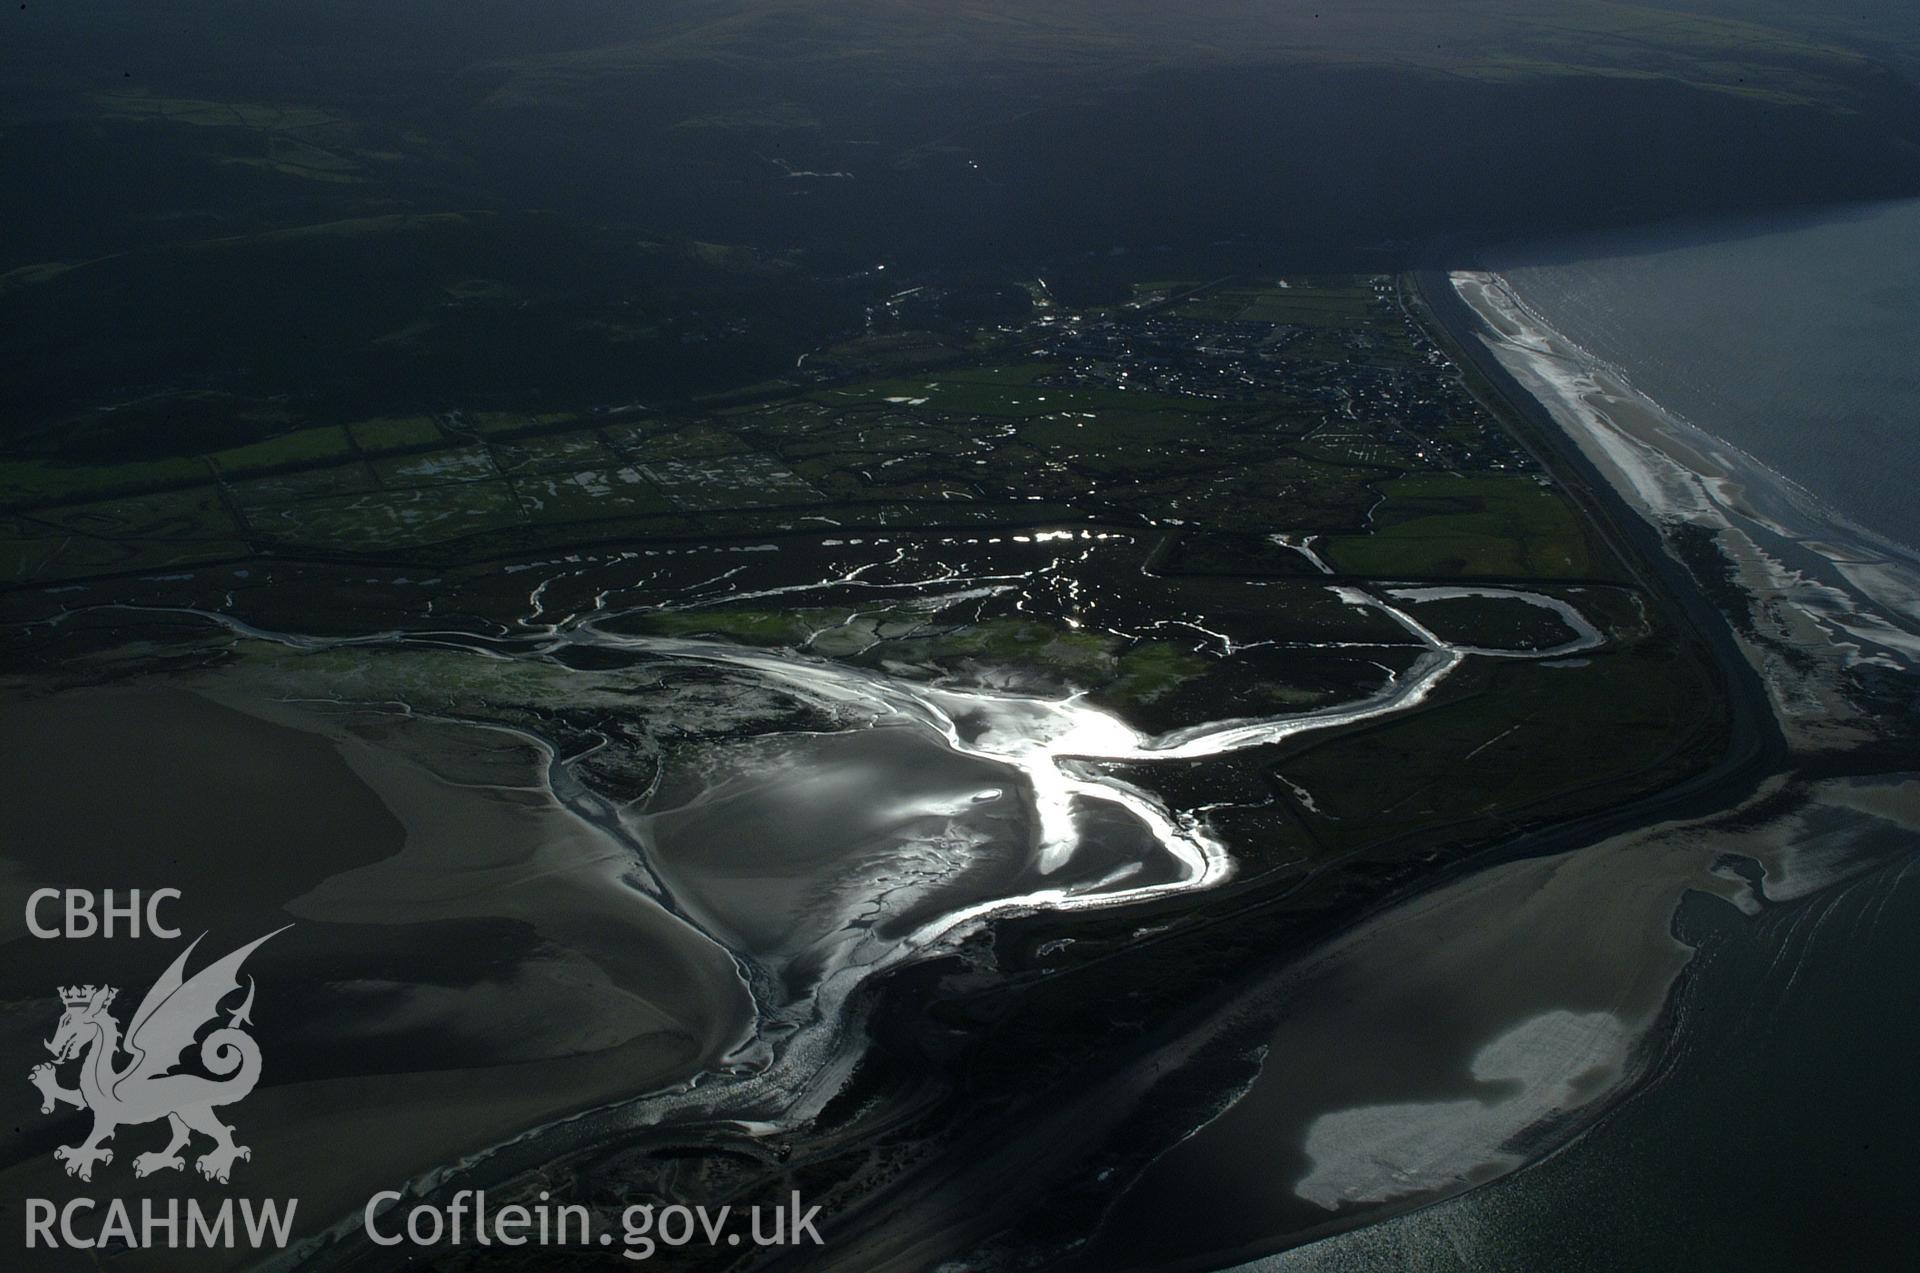 RCAHMW colour oblique aerial photograph of Fairbourne taken on 24/01/2005 by Toby Driver